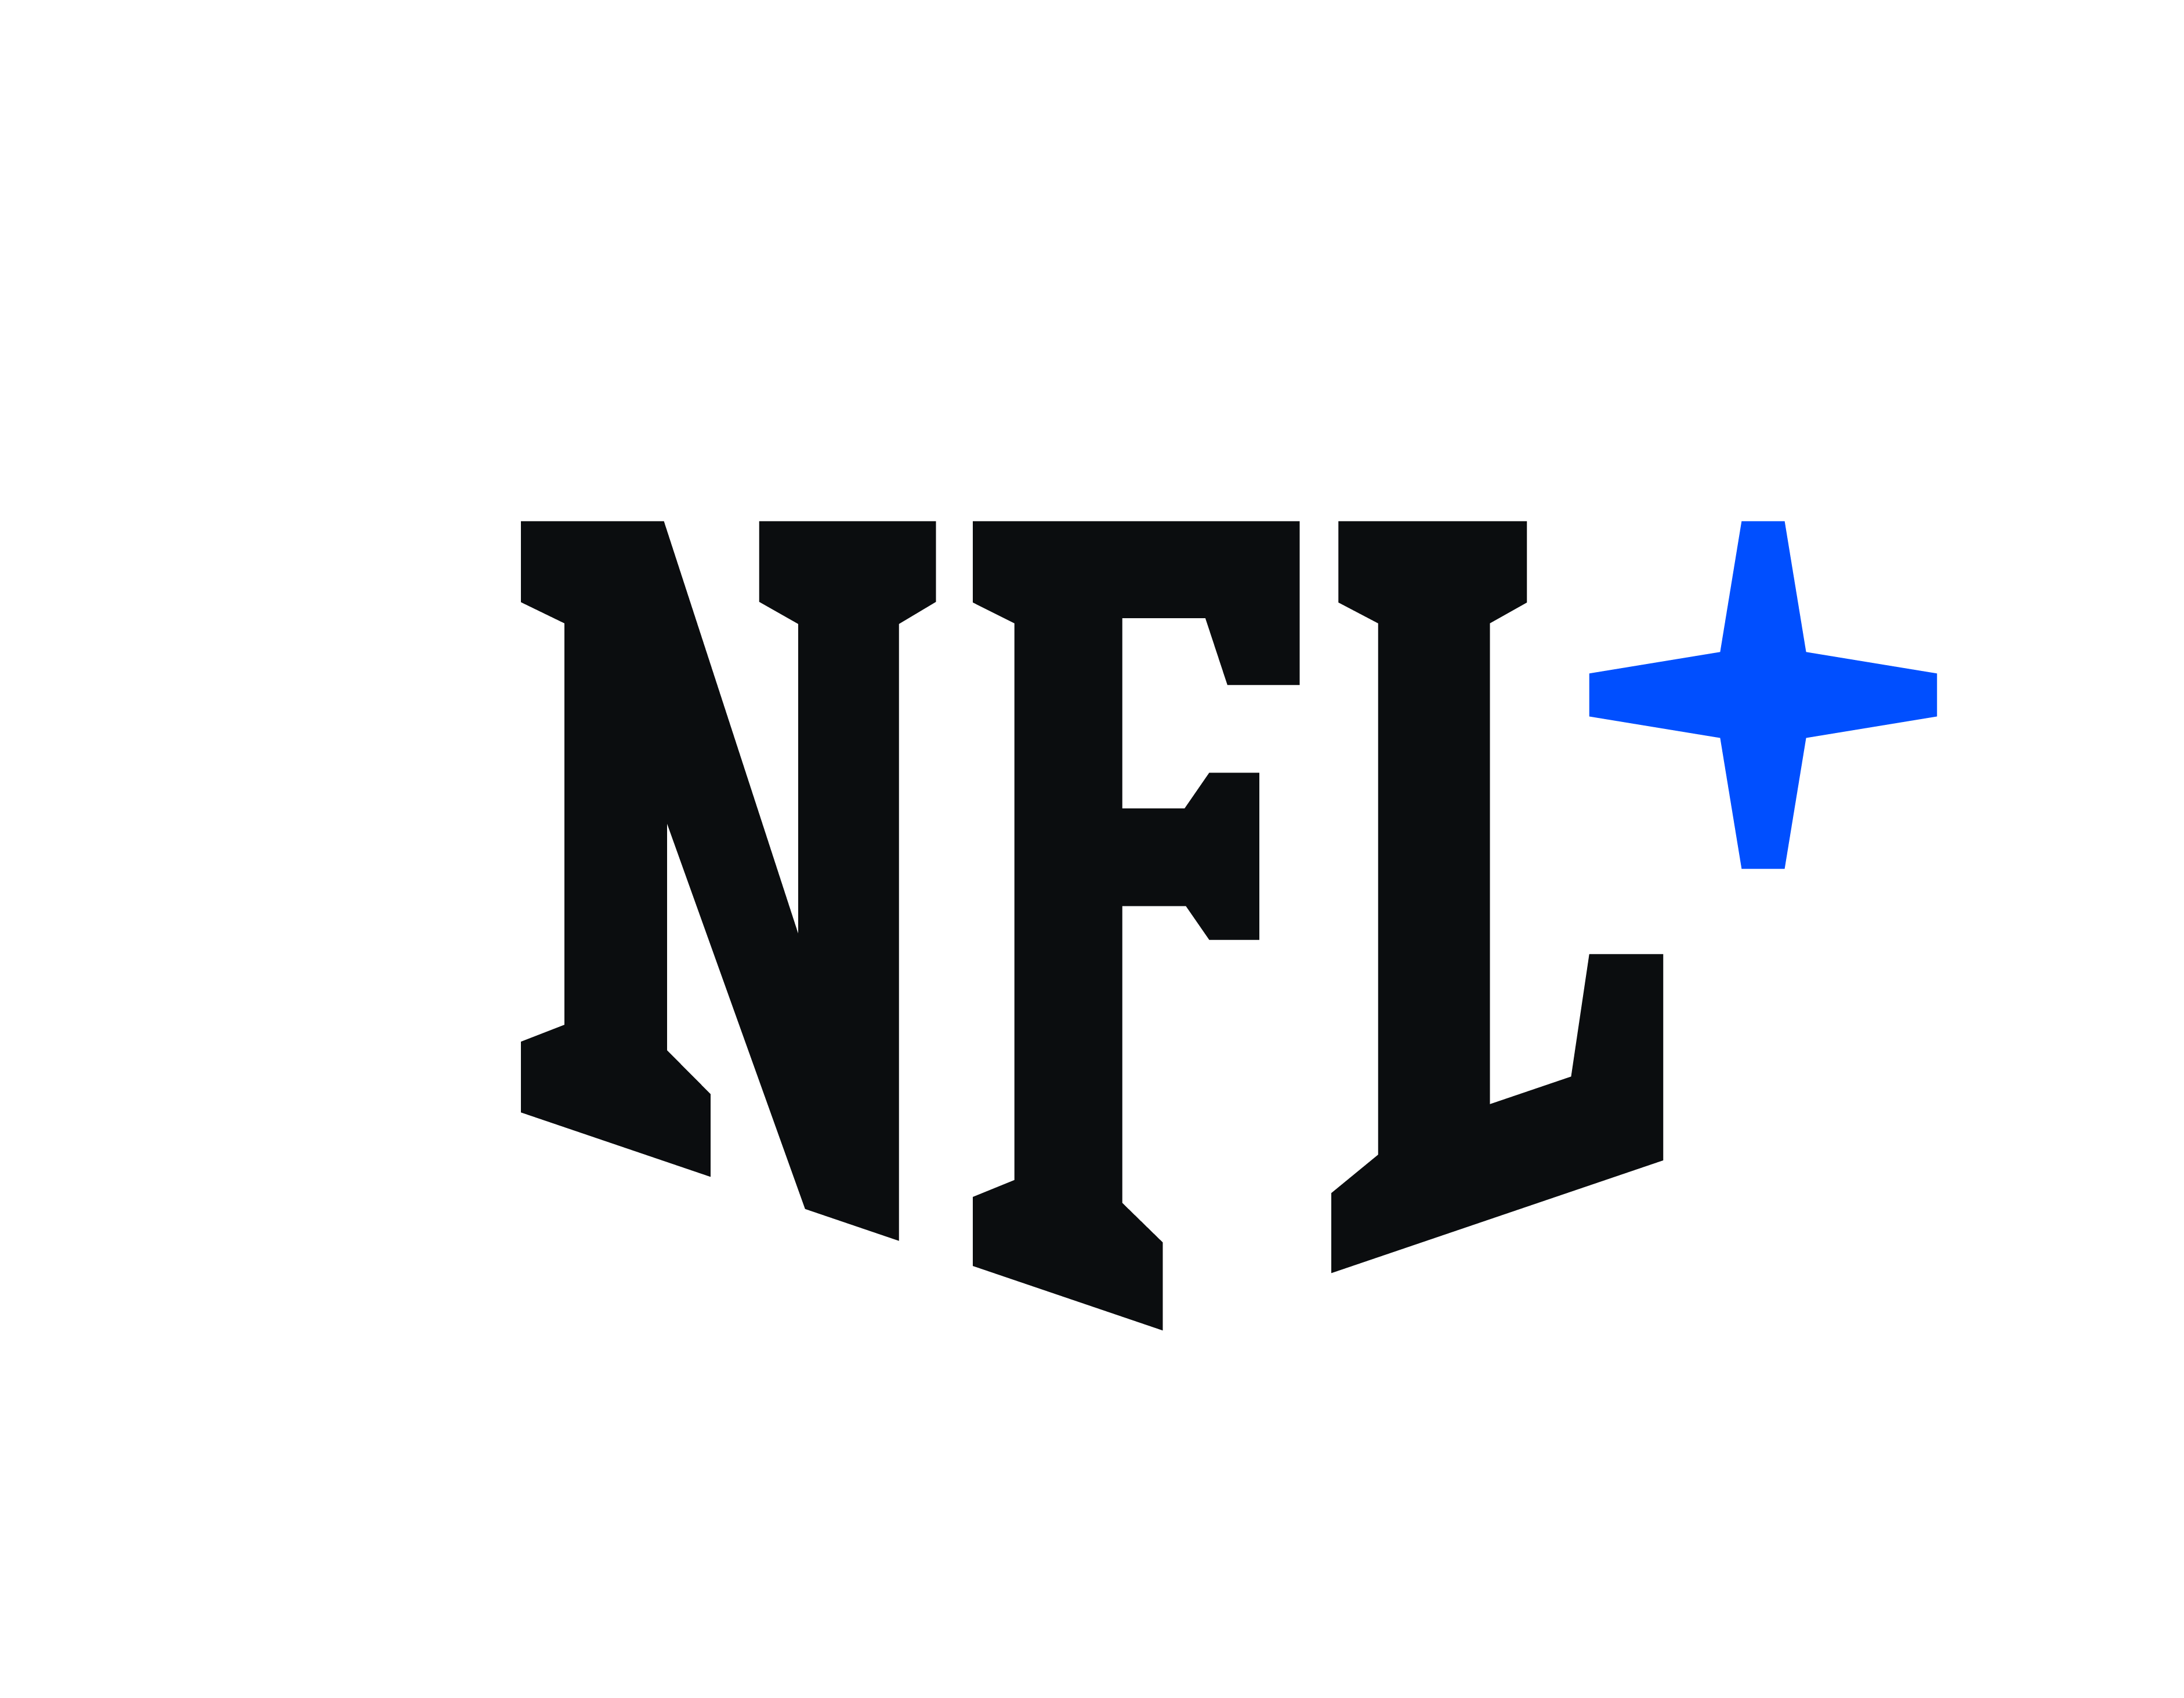 new nfl streaming service